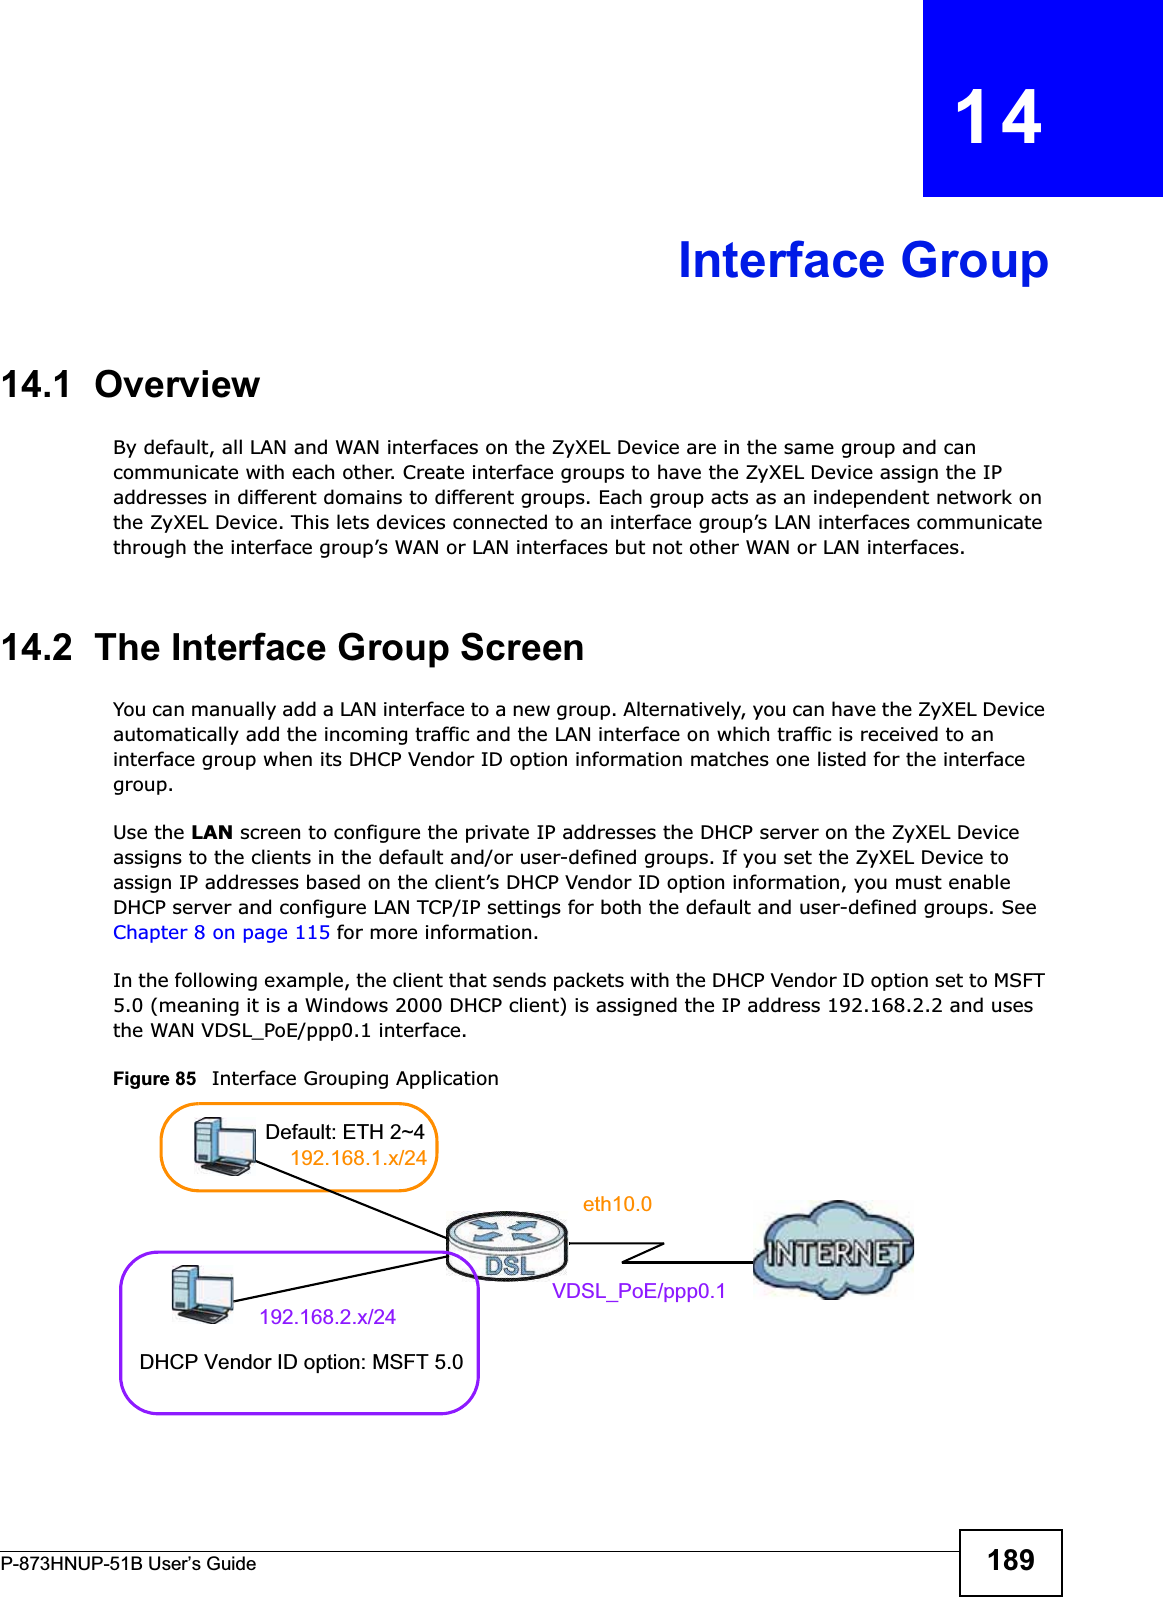 P-873HNUP-51B User’s Guide 189CHAPTER   14Interface Group14.1  OverviewBy default, all LAN and WAN interfaces on the ZyXEL Device are in the same group and can communicate with each other. Create interface groups to have the ZyXEL Device assign the IP addresses in different domains to different groups. Each group acts as an independent network on the ZyXEL Device. This lets devices connected to an interface group’s LAN interfaces communicate through the interface group’s WAN or LAN interfaces but not other WAN or LAN interfaces.14.2  The Interface Group ScreenYou can manually add a LAN interface to a new group. Alternatively, you can have the ZyXEL Device automatically add the incoming traffic and the LAN interface on which traffic is received to an interface group when its DHCP Vendor ID option information matches one listed for the interface group. Use the LAN screen to configure the private IP addresses the DHCP server on the ZyXEL Device assigns to the clients in the default and/or user-defined groups. If you set the ZyXEL Device to assign IP addresses based on the client’s DHCP Vendor ID option information, you must enable DHCP server and configure LAN TCP/IP settings for both the default and user-defined groups. See Chapter 8 on page 115 for more information.In the following example, the client that sends packets with the DHCP Vendor ID option set to MSFT 5.0 (meaning it is a Windows 2000 DHCP client) is assigned the IP address 192.168.2.2 and uses the WAN VDSL_PoE/ppp0.1 interface.Figure 85   Interface Grouping ApplicationDefault: ETH 2~4192.168.1.x/24192.168.2.x/24VDSL_PoE/ppp0.1eth10.0DHCP Vendor ID option: MSFT 5.0